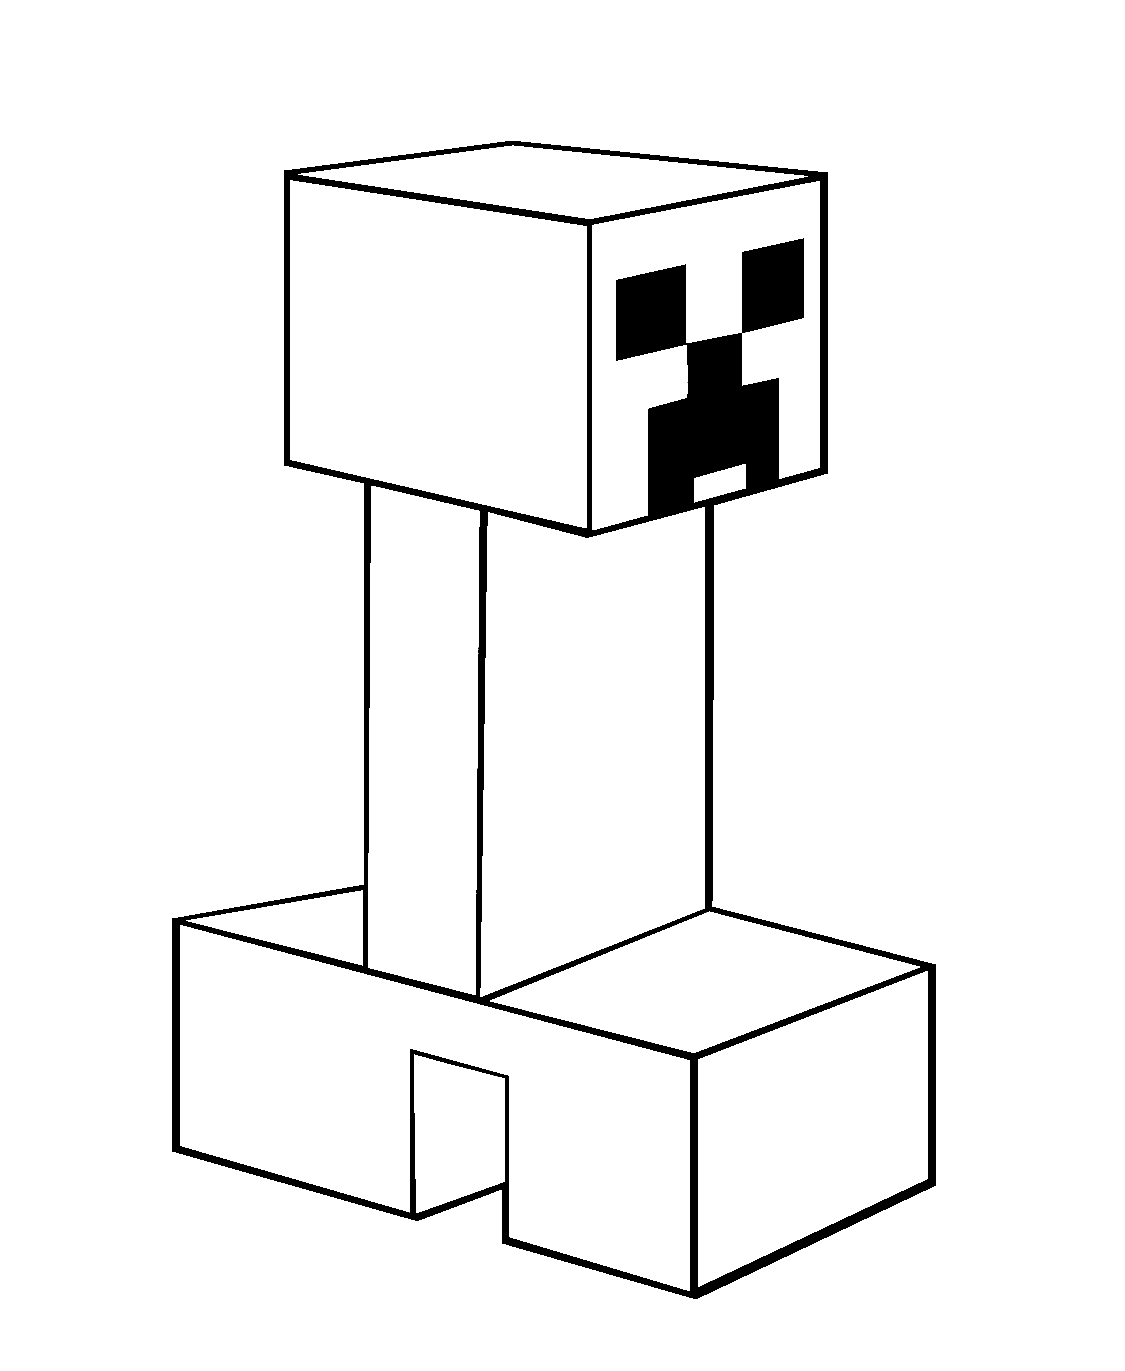 Minecraft Creeper Image Coloring Page